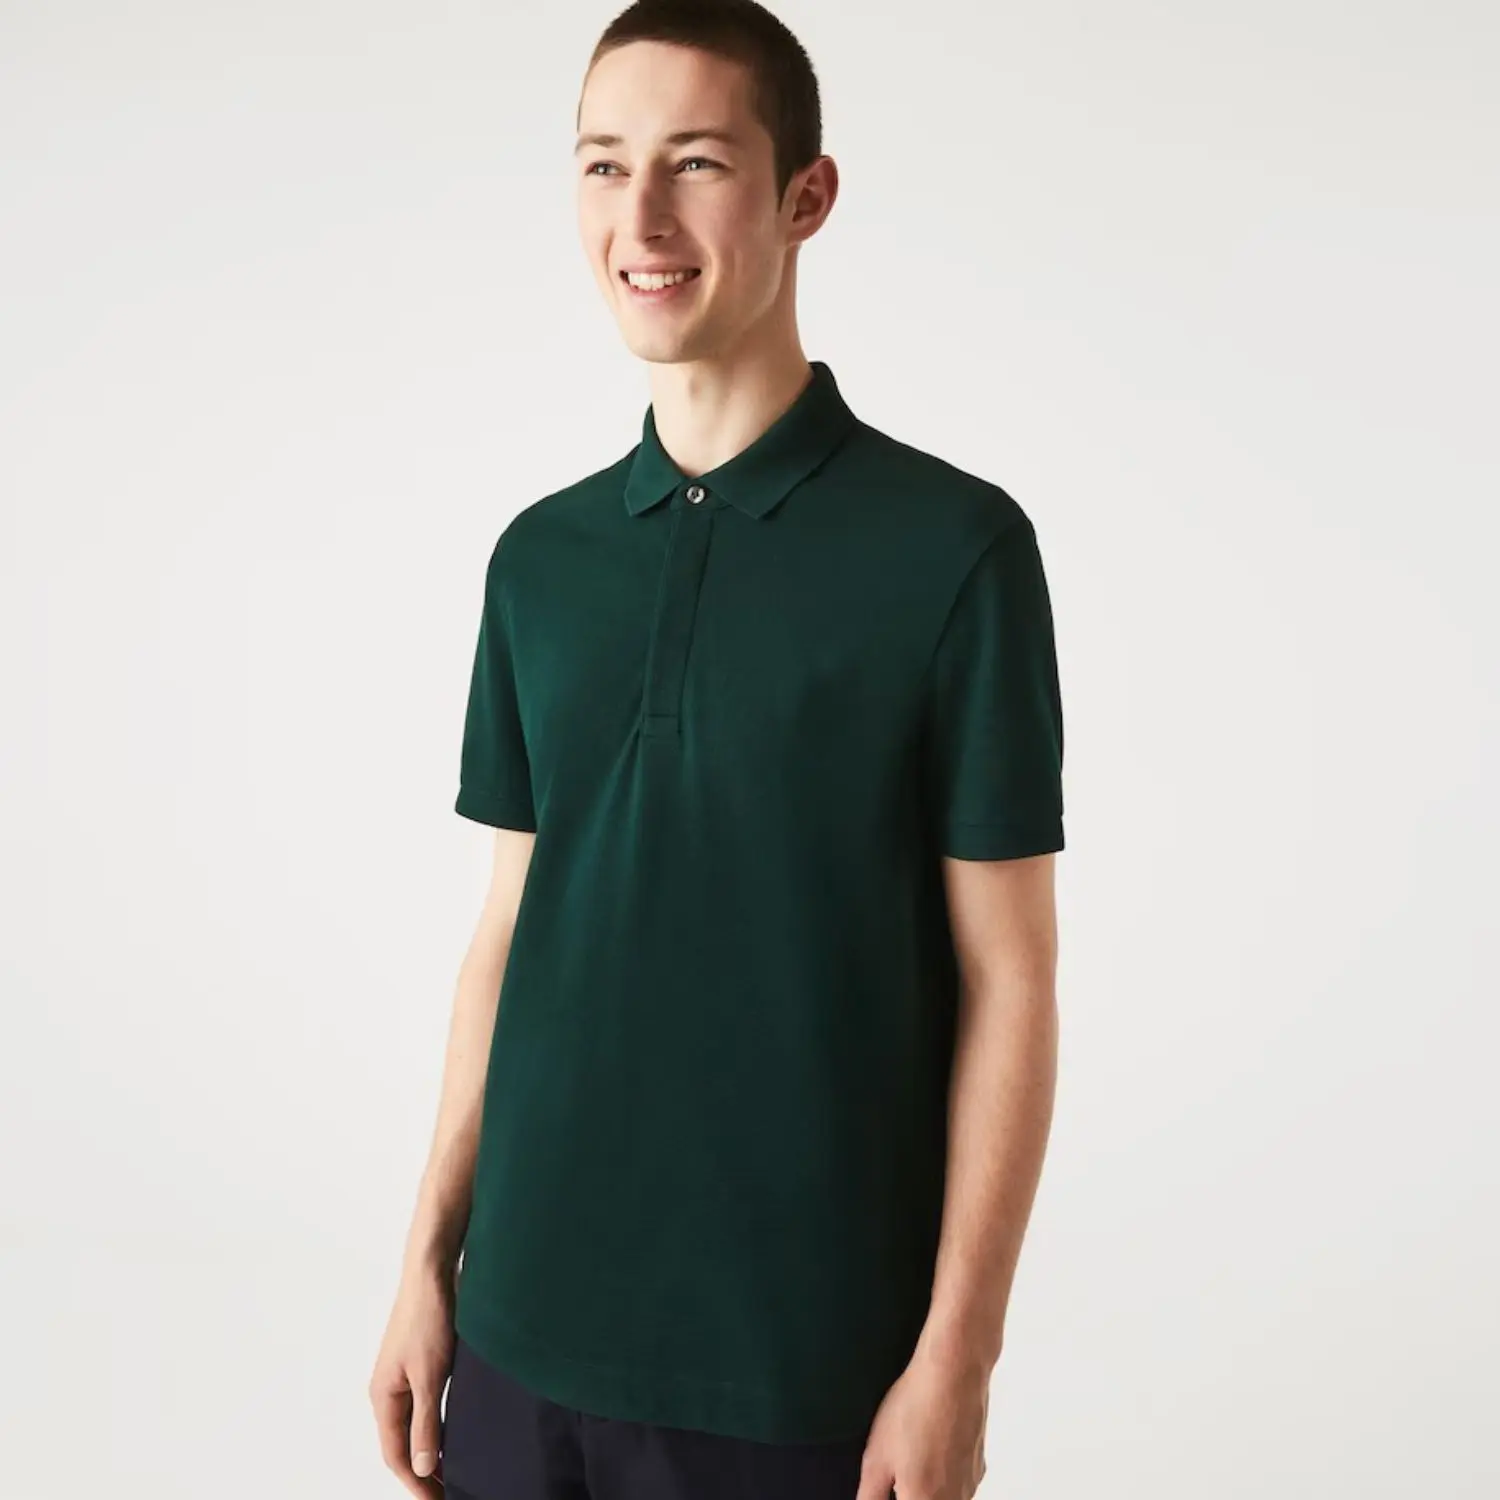 Custom Embroidered Logo Regular Fit 100% Dark Green Stretch Cotton Pique Polo Shirt with Concealed Button Placket and Rib